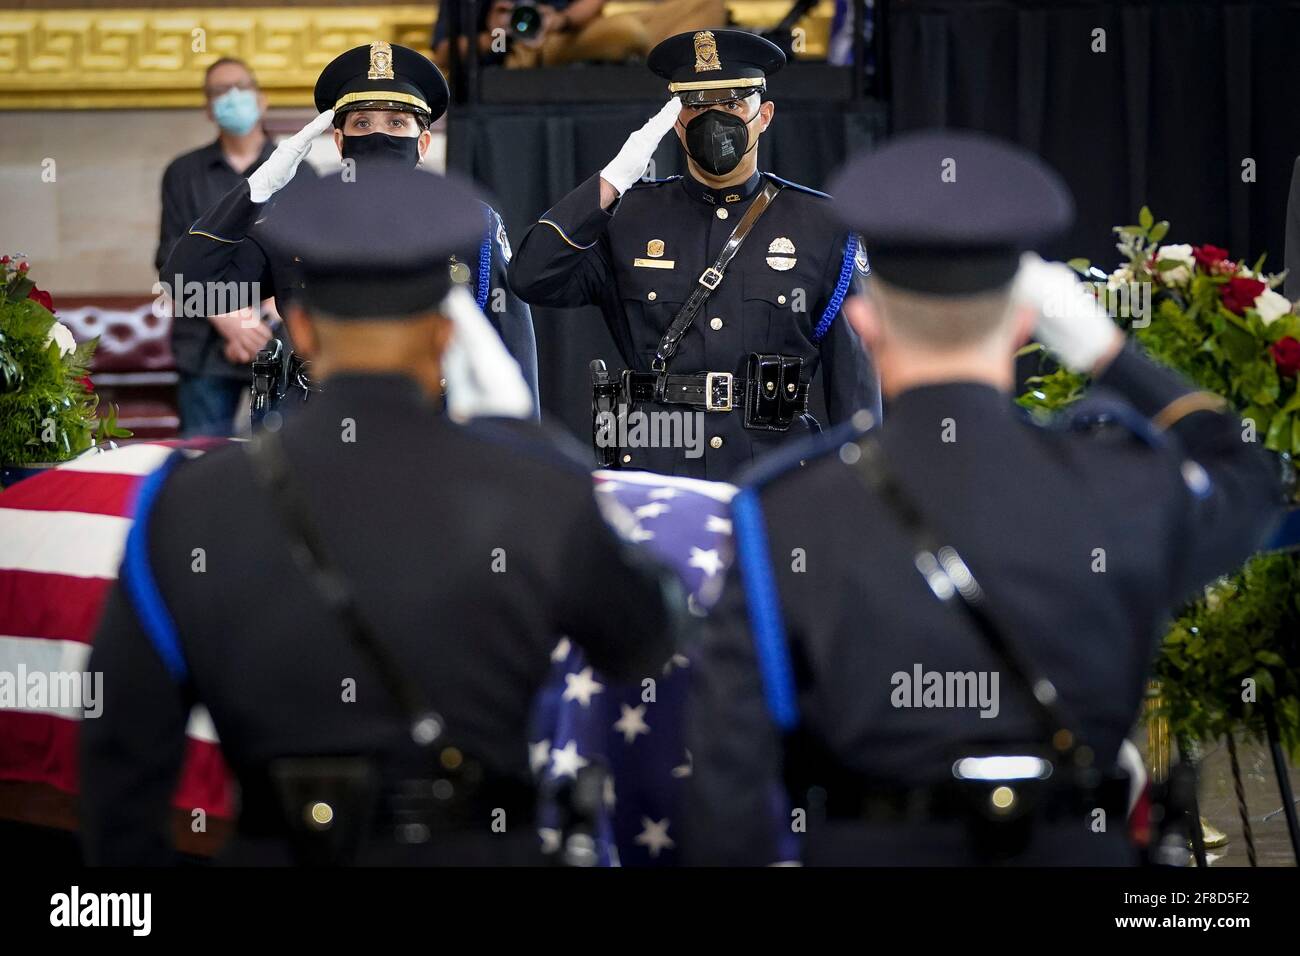 WASHINGTON, DC - APRIL 13: Members of a Capitol Police honor guard salute at the casket of the late U.S. Capitol Police officer William 'Billy' Evans during a memorial service as Evans lies in honor in the Rotunda at the U.S. Capitol on April 13, 2021 in Washington, DC. Officer Evans was killed in the line of duty during the attack outside the U.S. Capitol on April 2. He is the sixth Capitol Police officer to die in the line of duty in the nearly 200 years since the force was created. Credit: Drew Angerer/Pool via CNP | usage worldwide Stock Photo